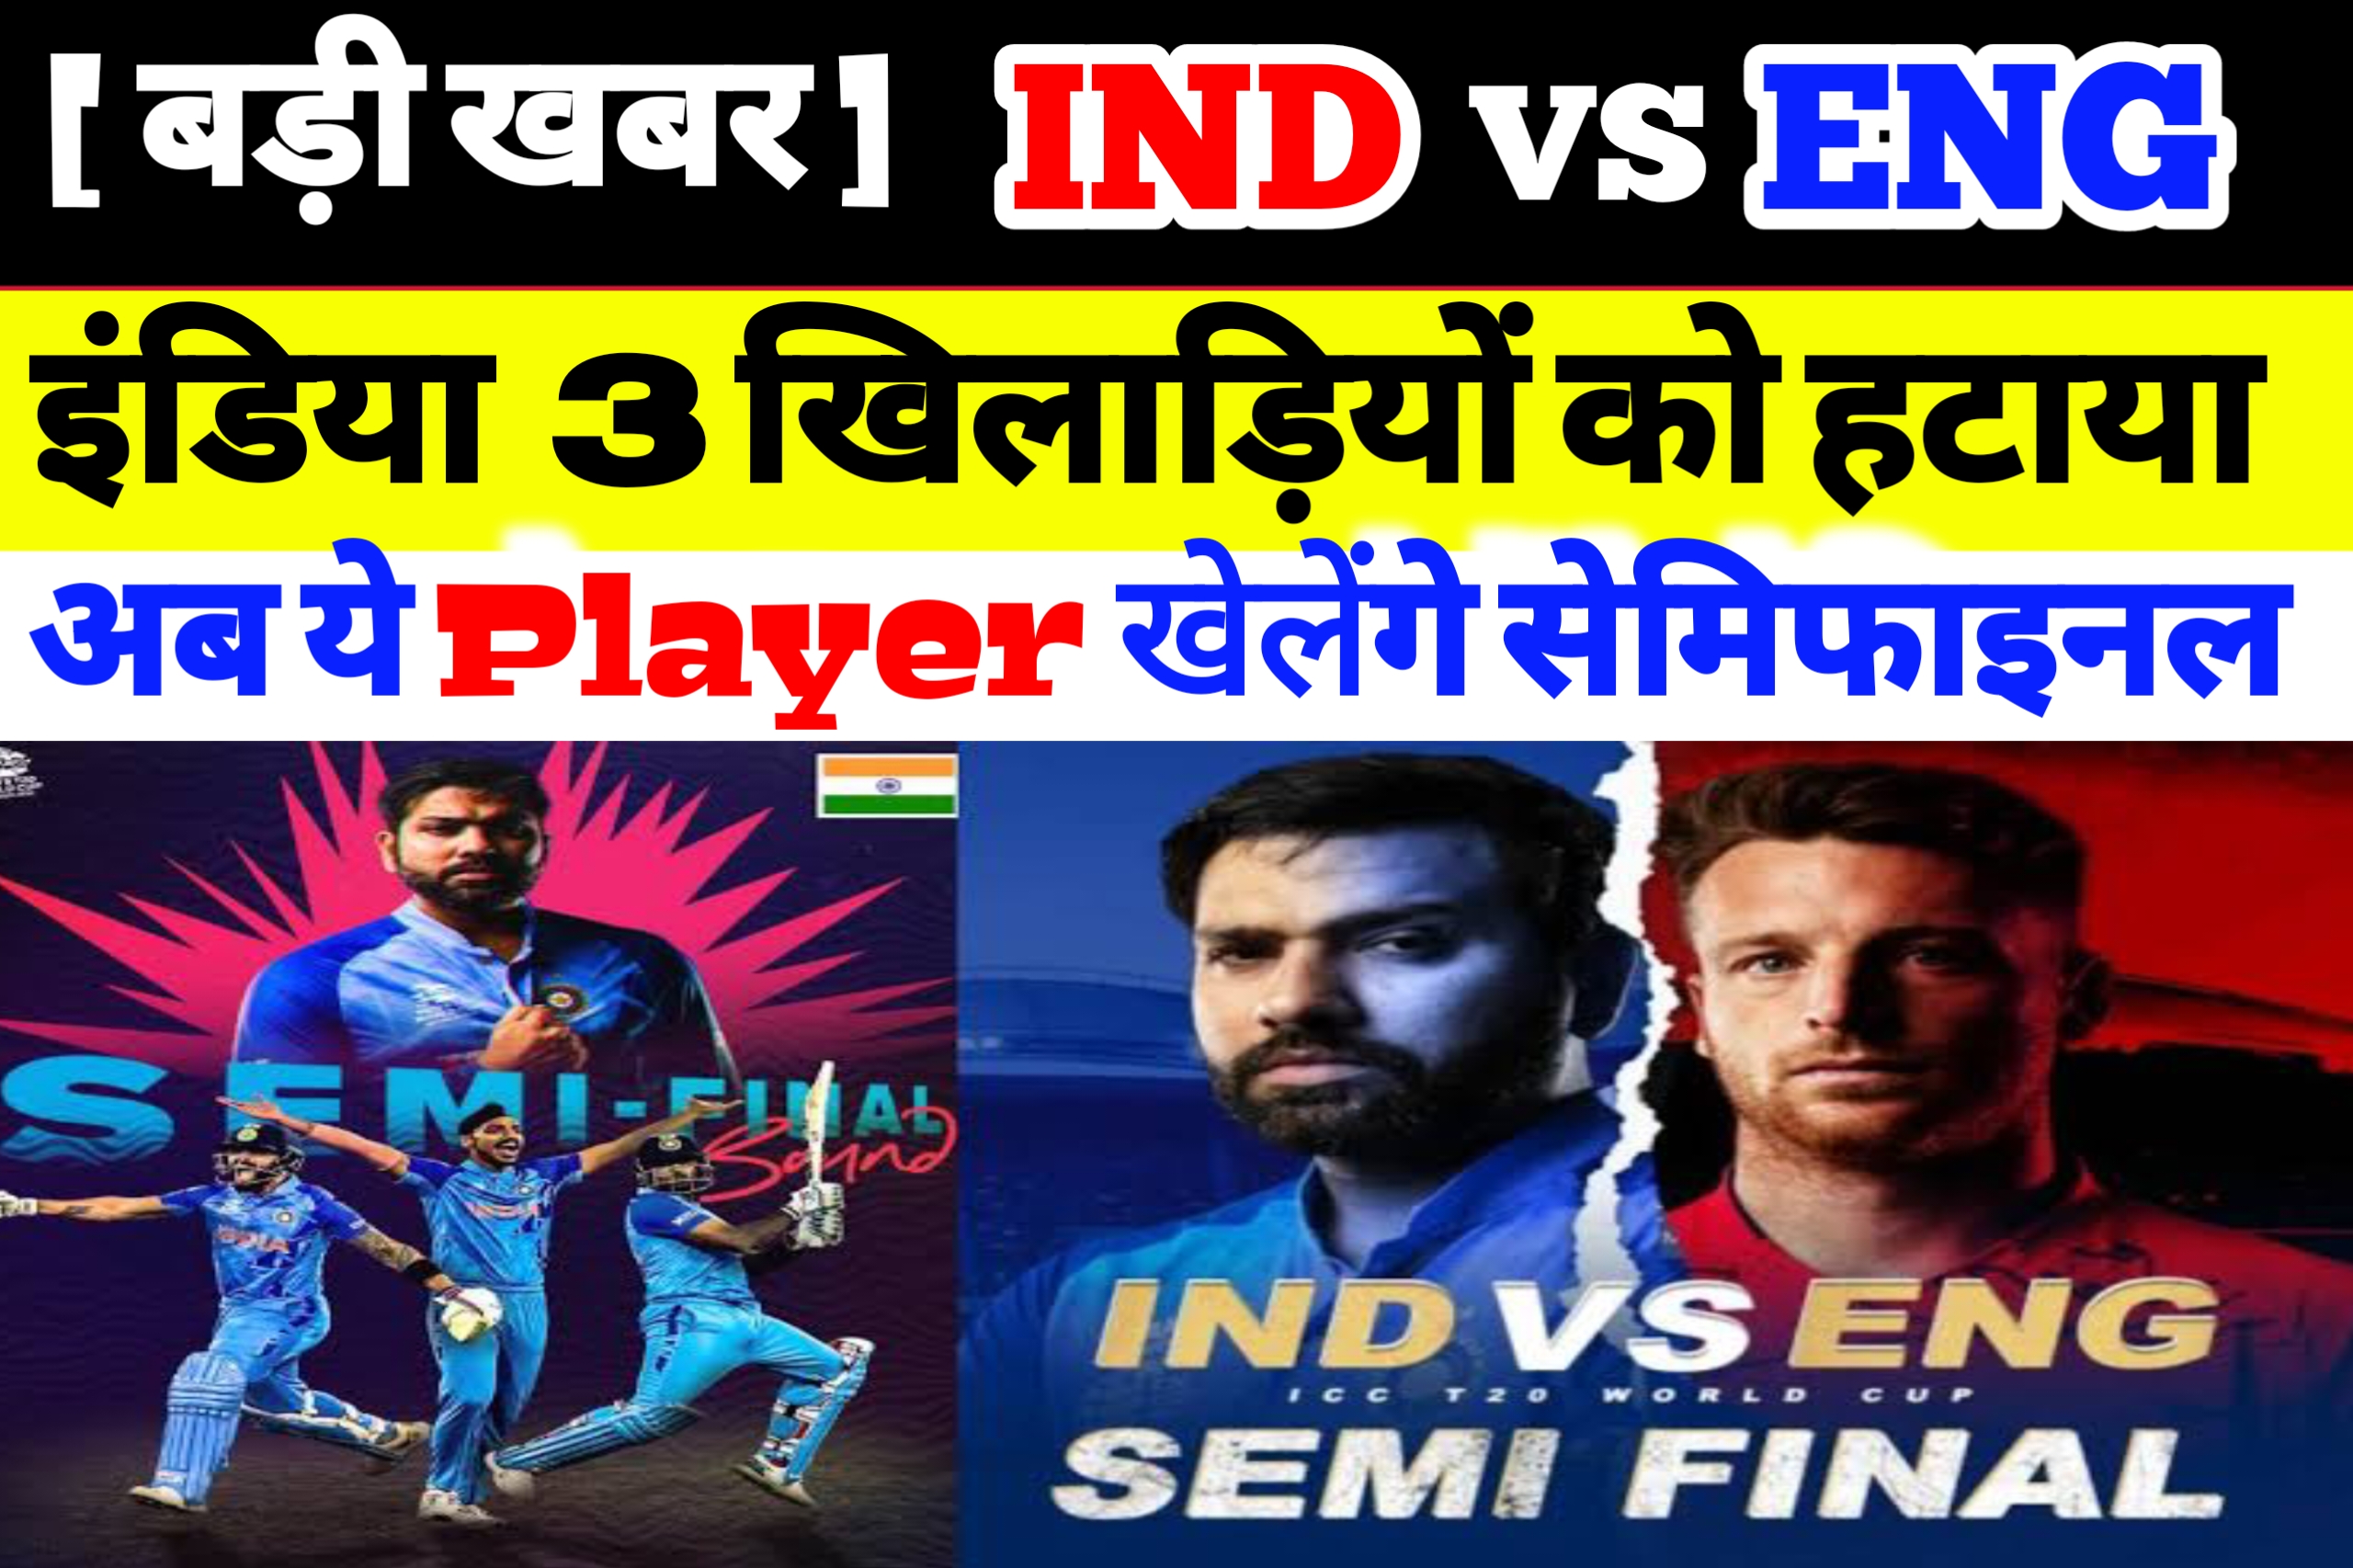  ind vs eng , india vs england semifinal,ind vs eng playing 11,icc t20 world cup